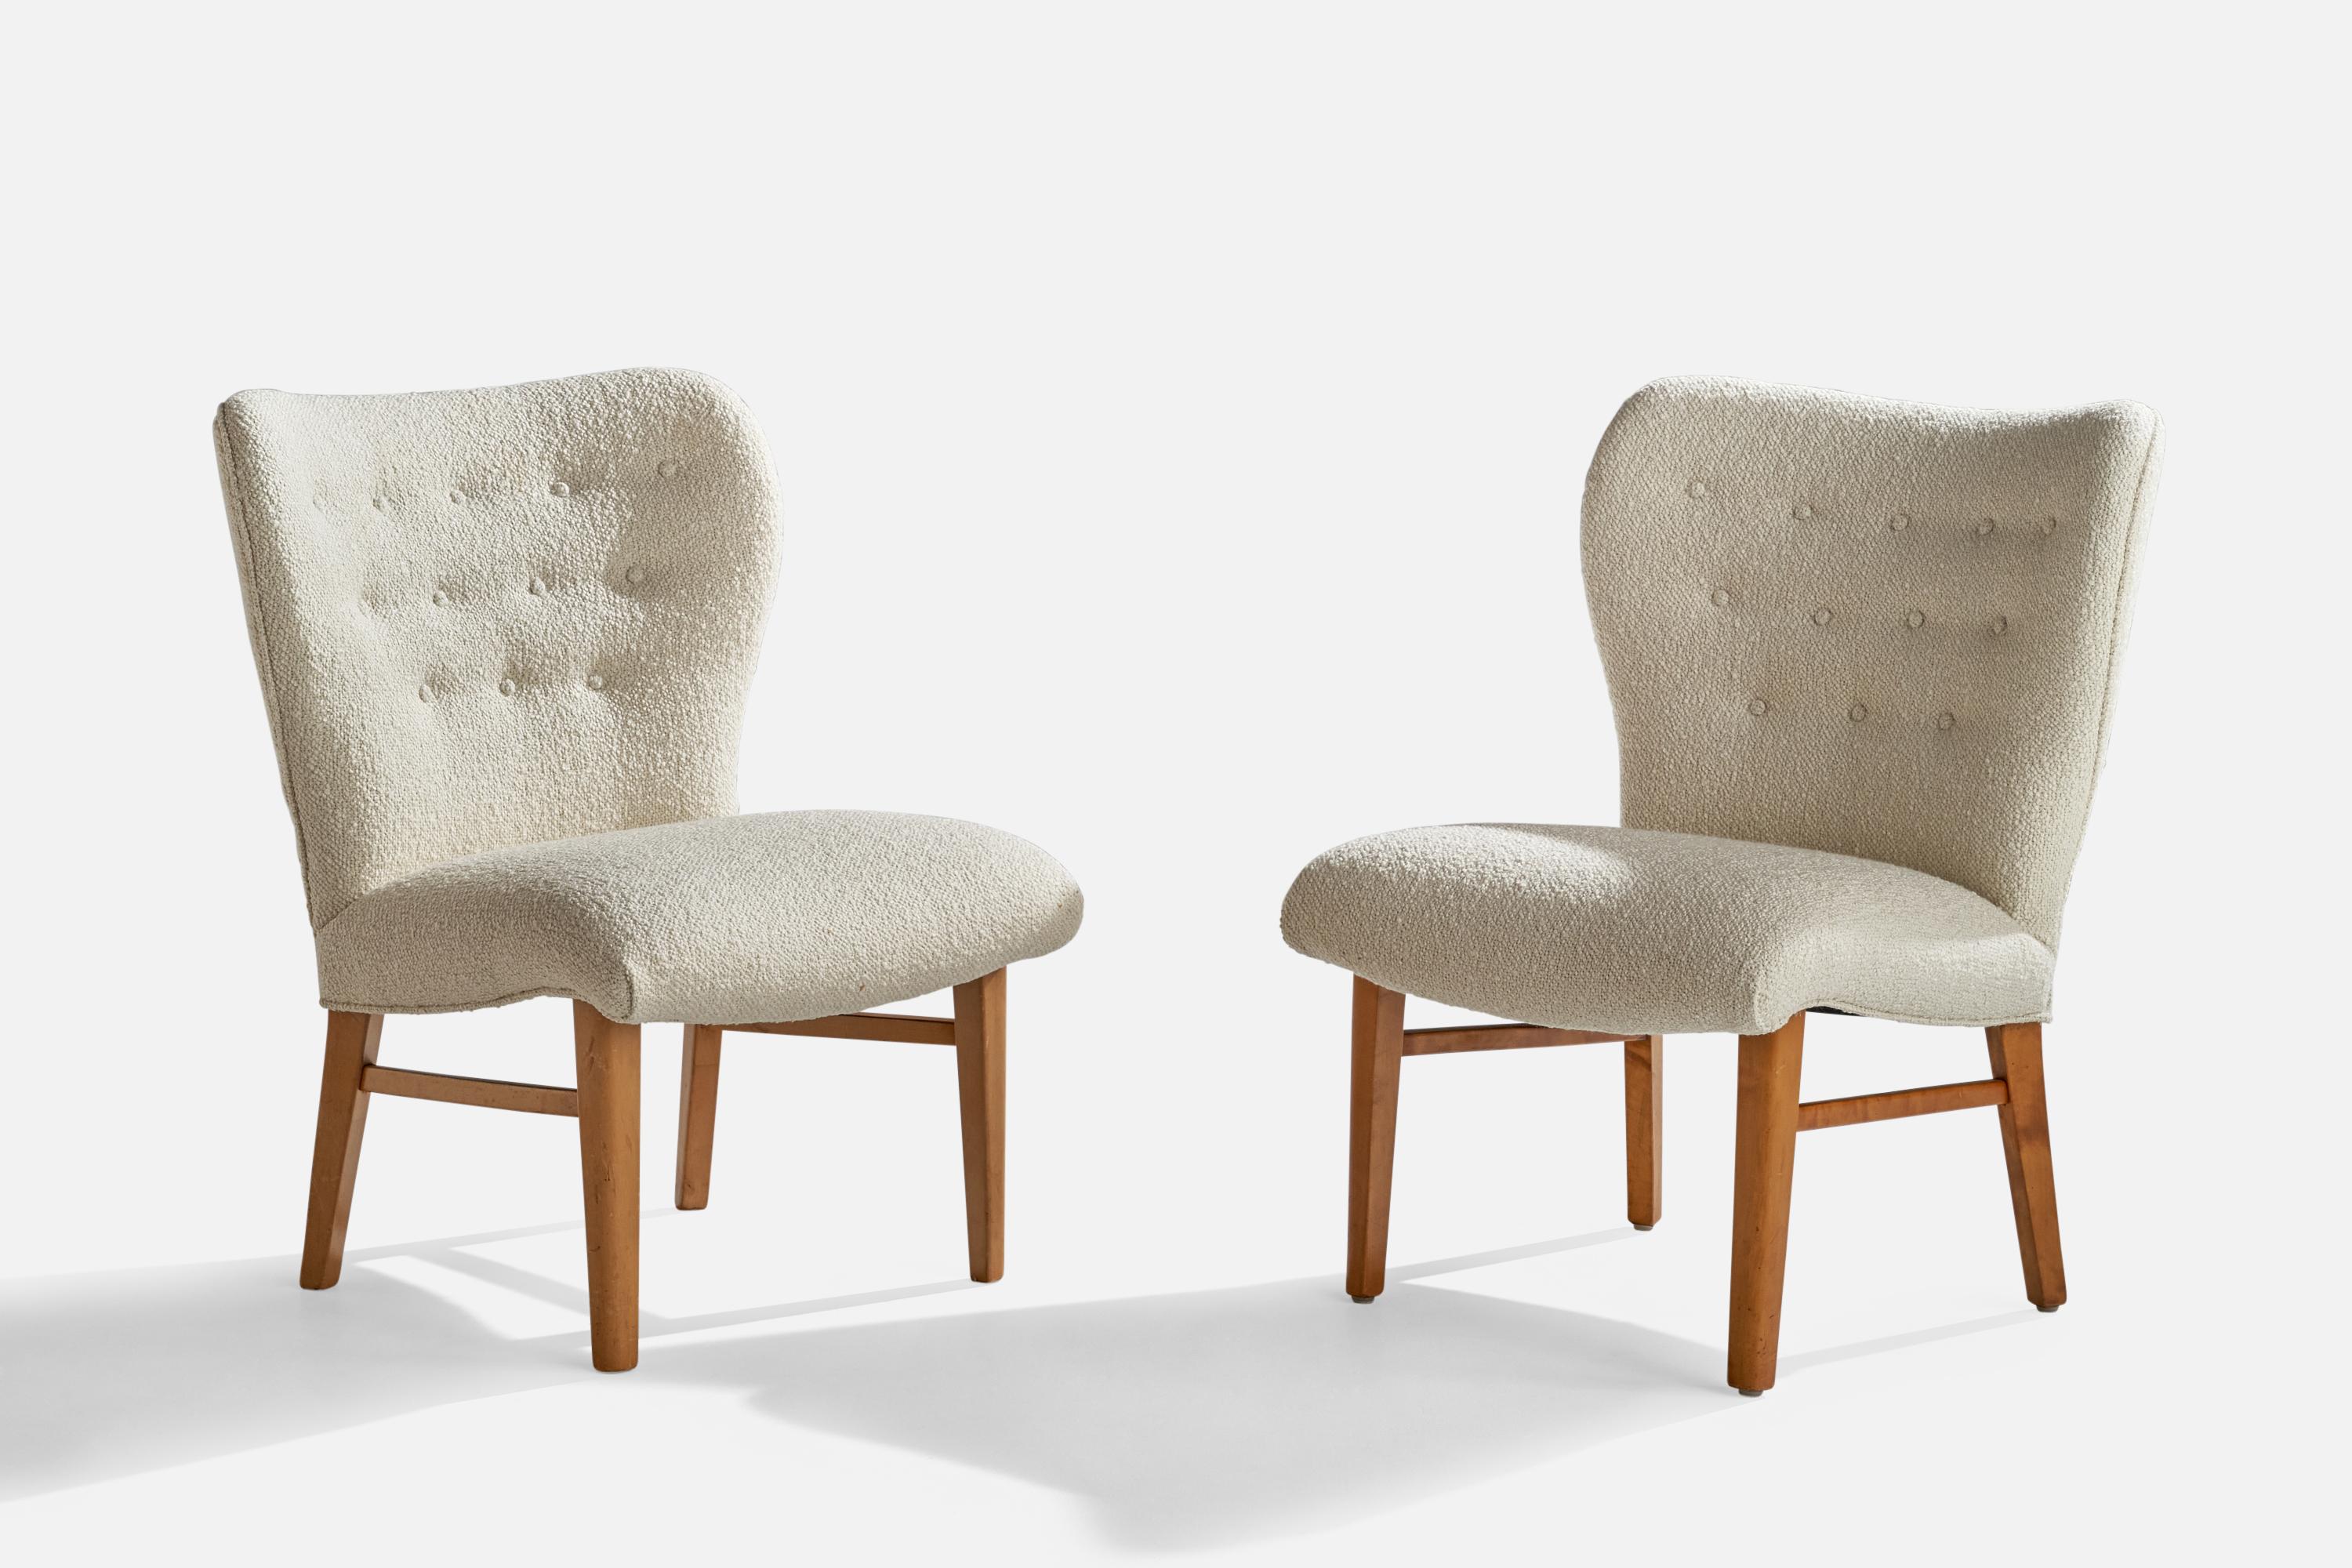 A pair of white bouclé fabric and beech slipper lounge chairs attributed to Erik Karlén for Firma Rumsinteriör, Sweden, c. 1950s.

Seat height: 16.25”